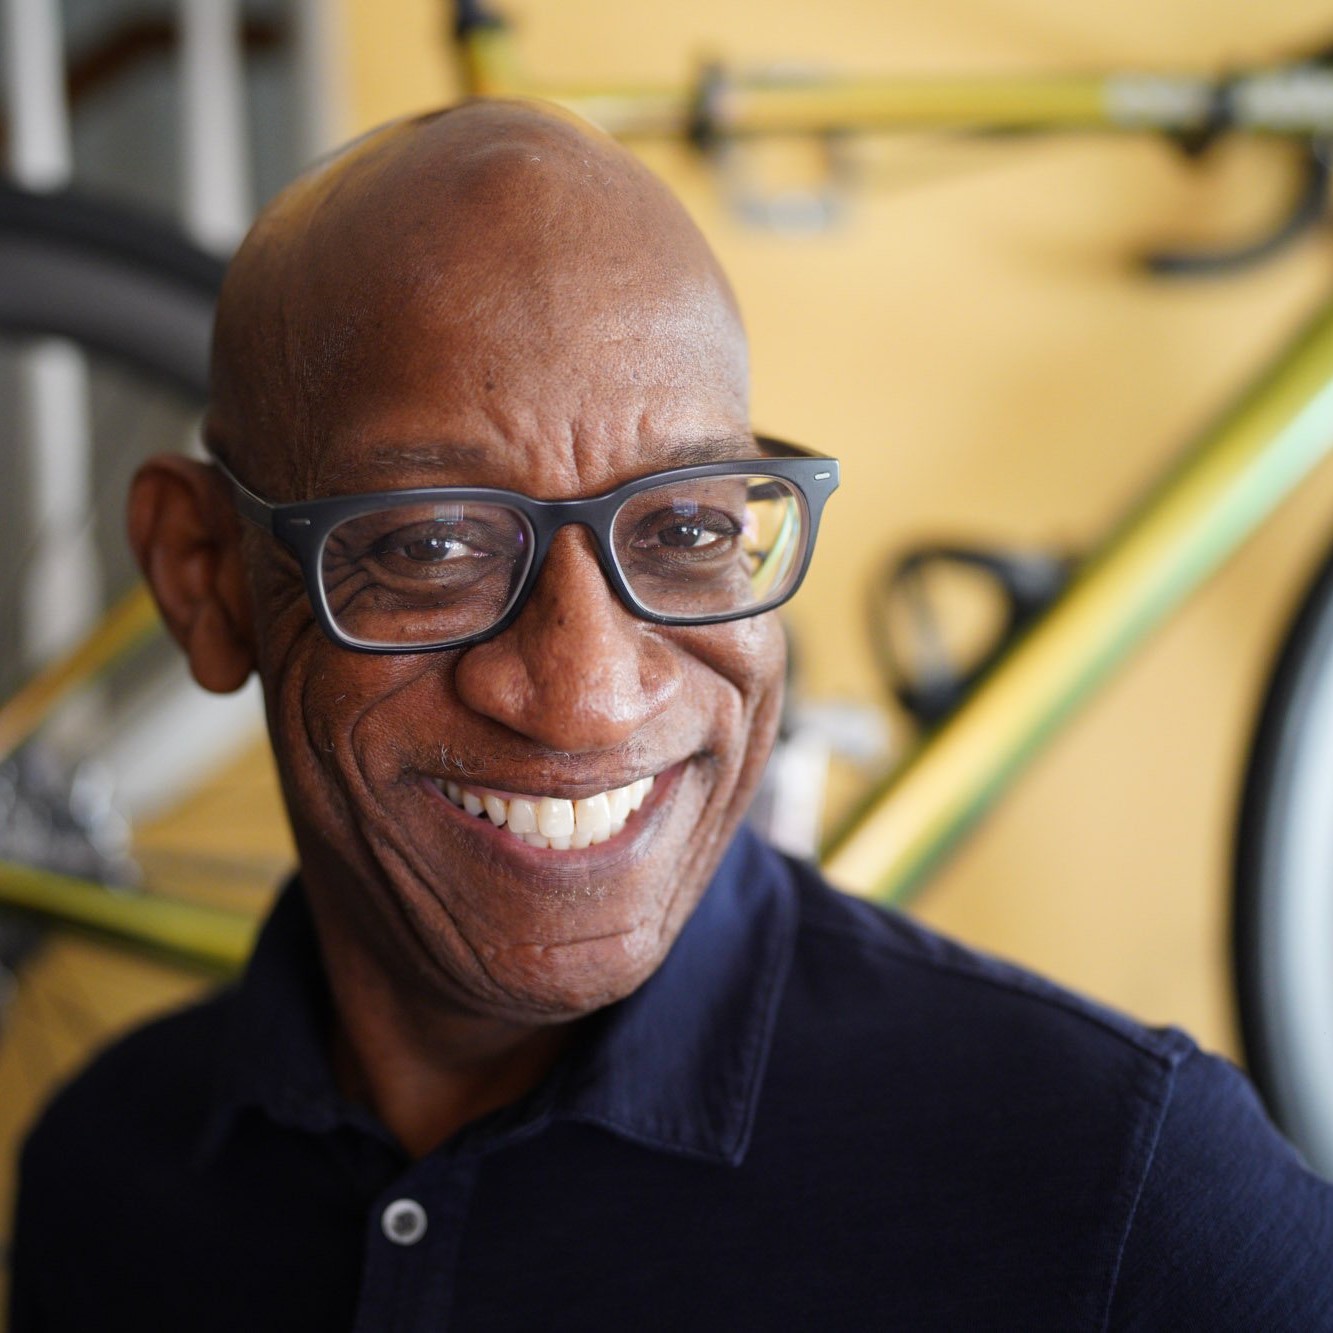 A Black man wearing glasses, photographed from the chest up with a bike in the background.